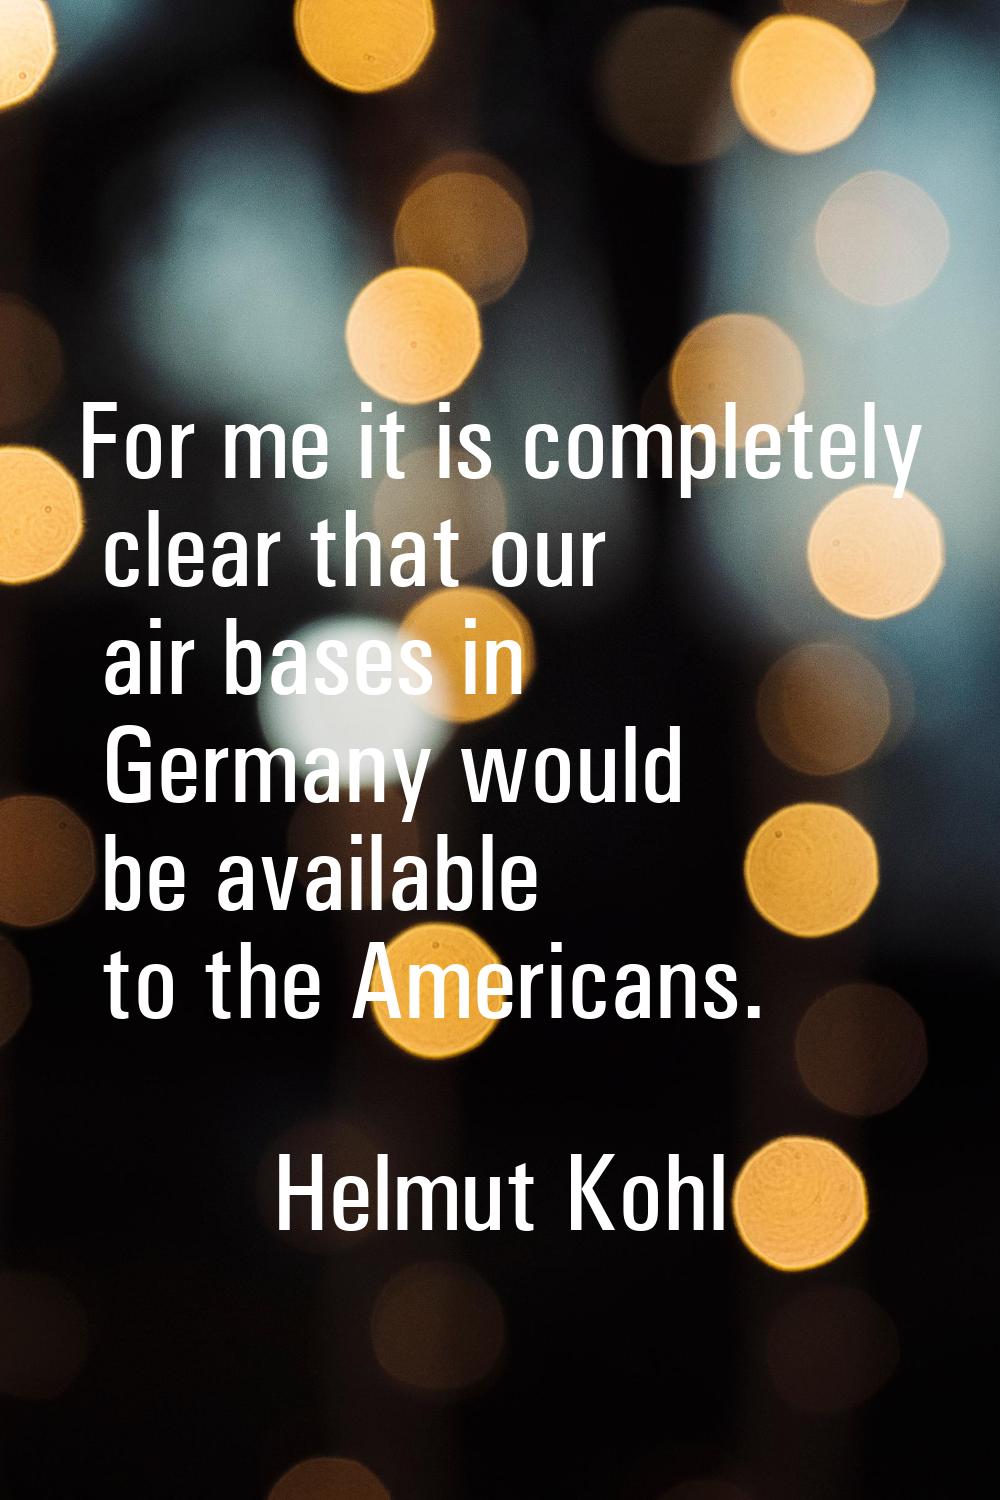 For me it is completely clear that our air bases in Germany would be available to the Americans.